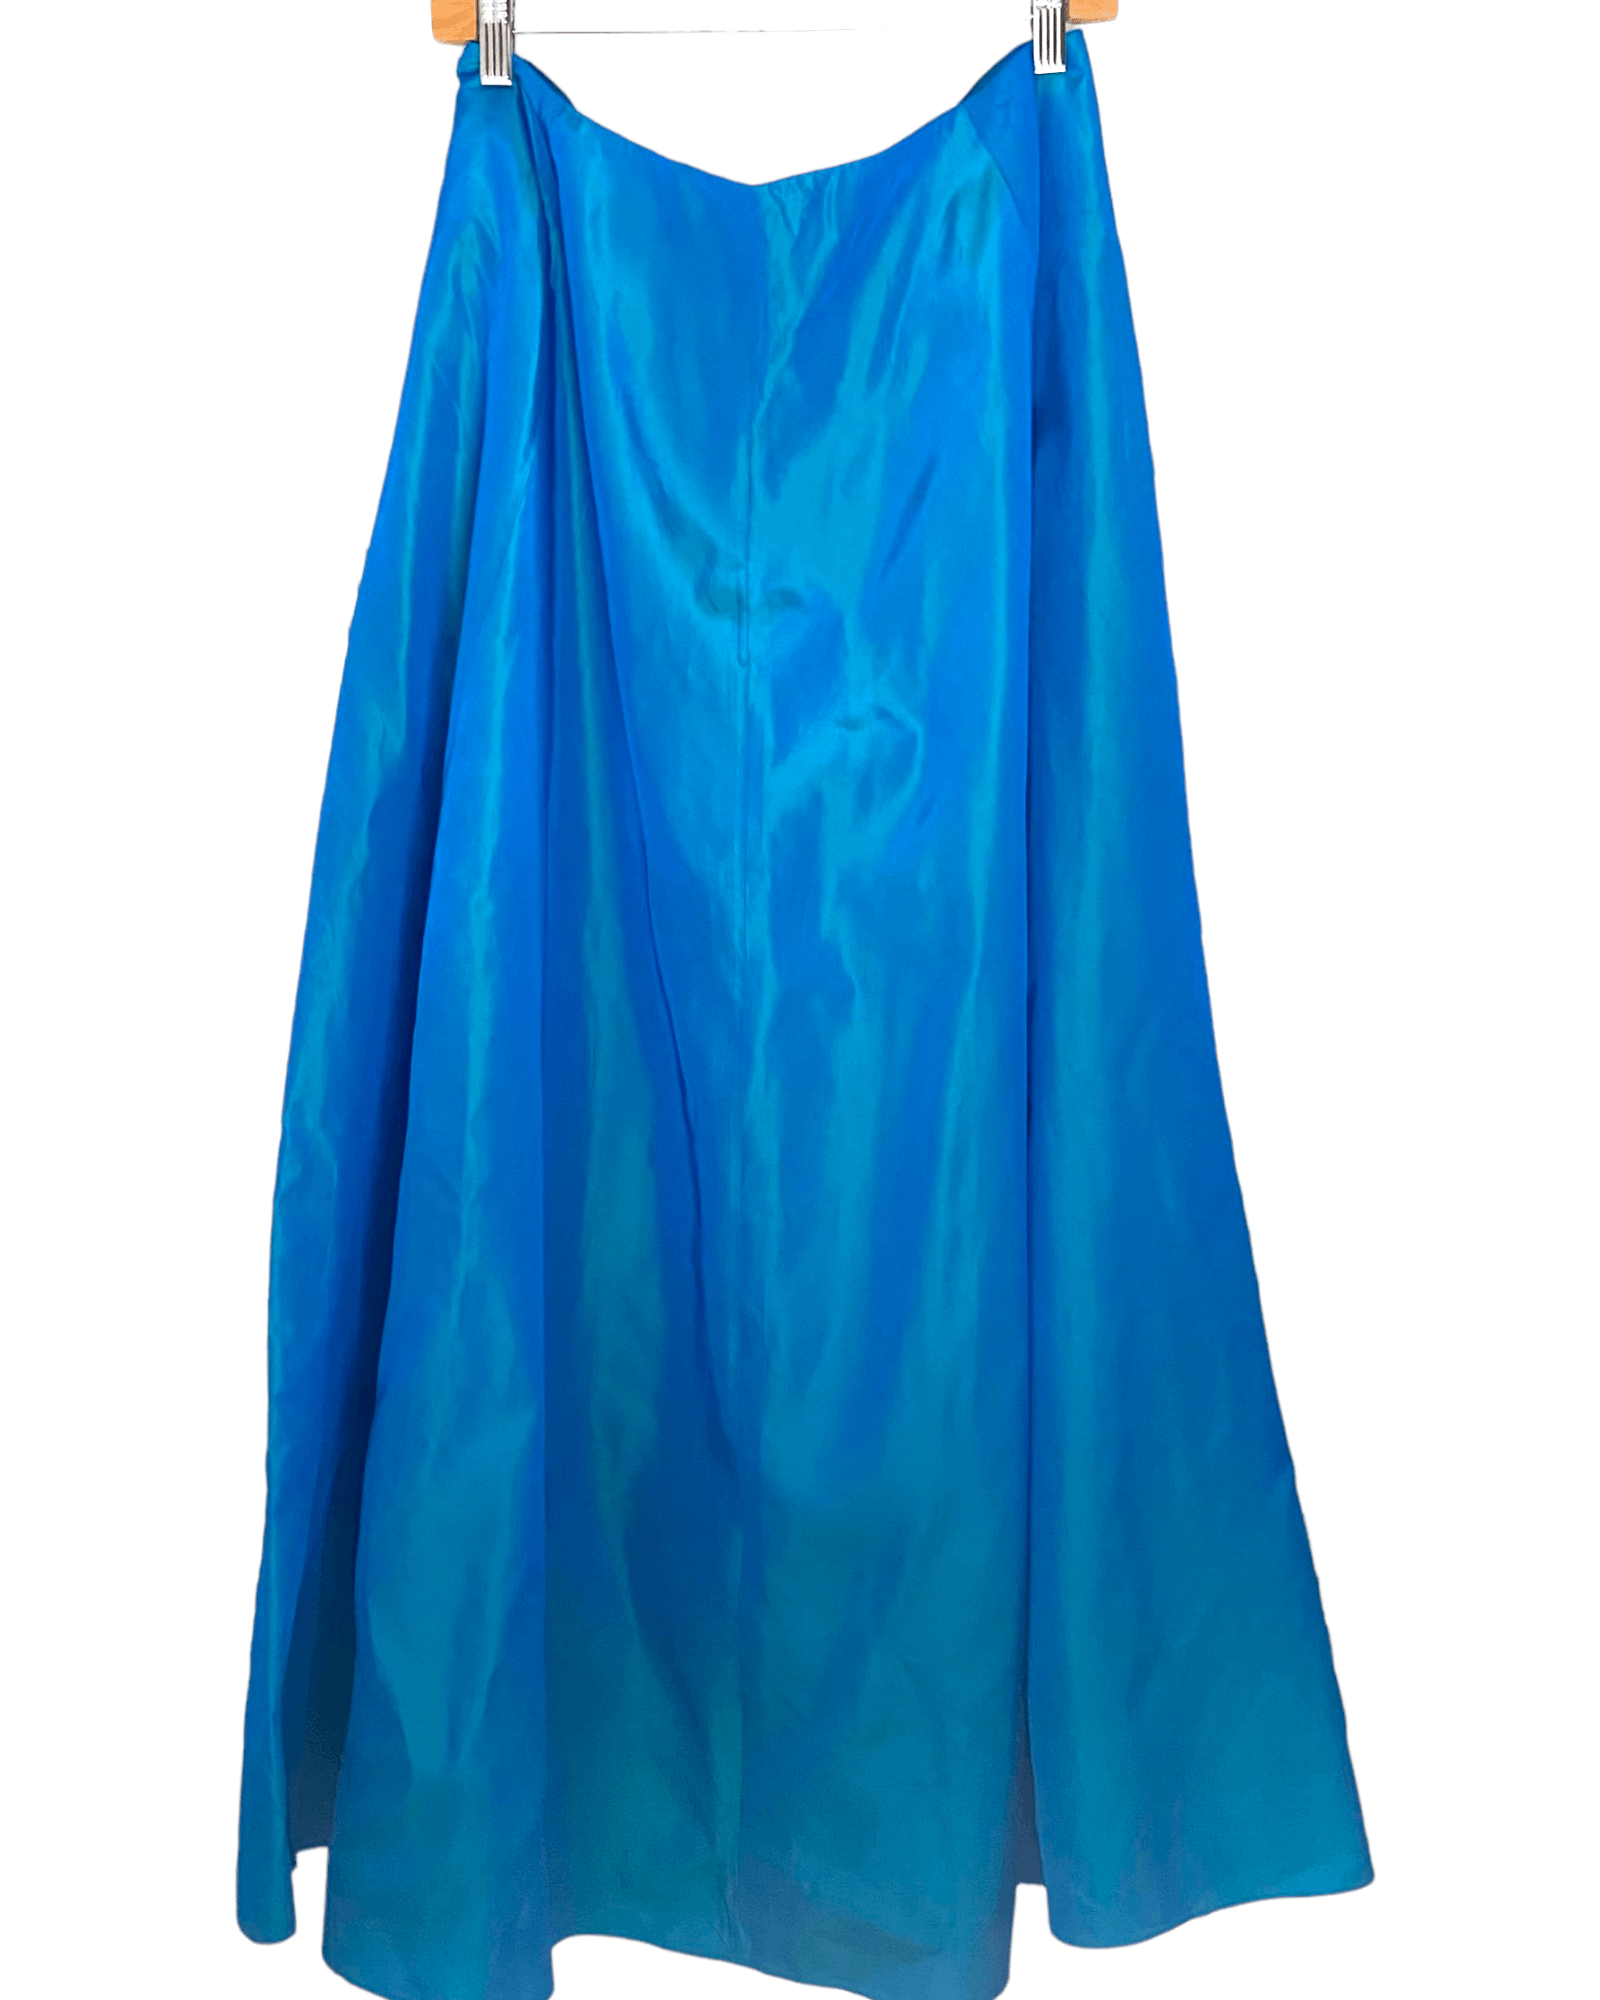 Bright Winter LE CHATEAU peacock shimmer maxi skirt